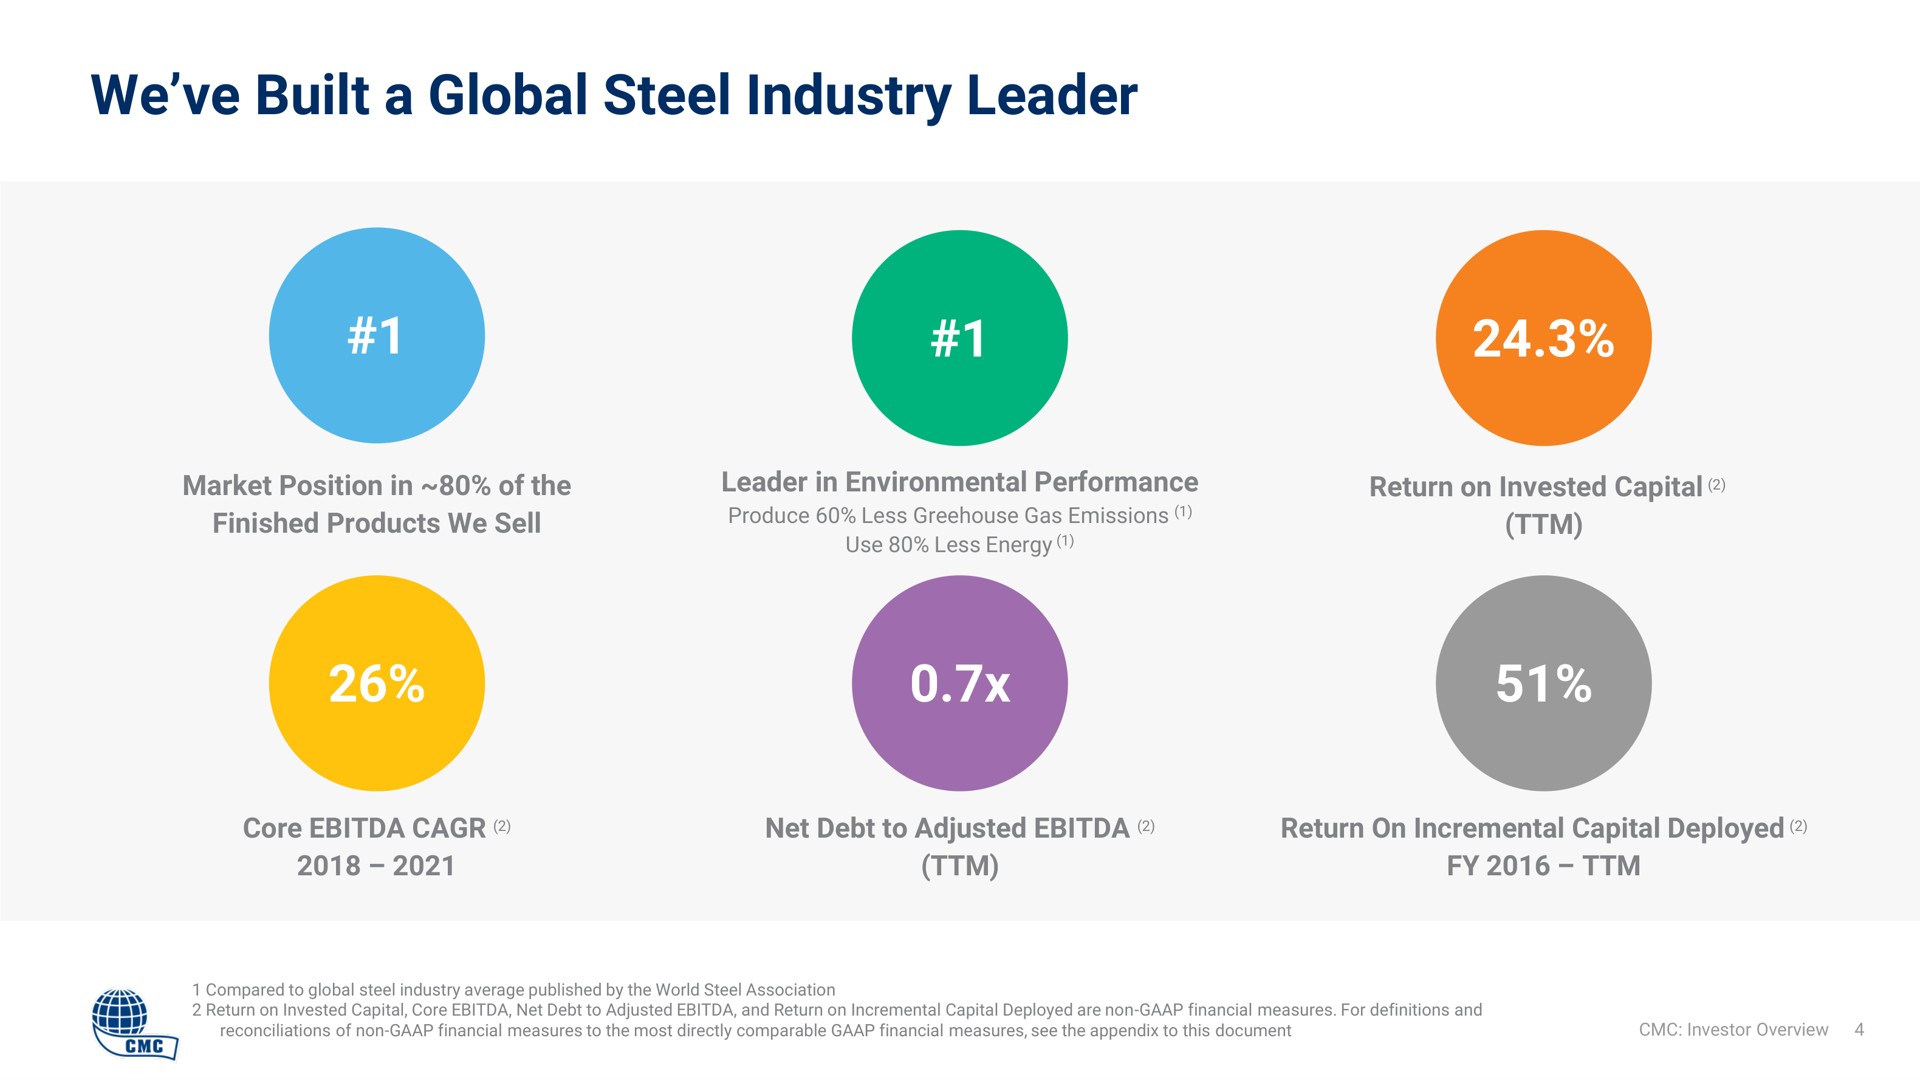 we built a global steel industry leader | Commercial Metals Company